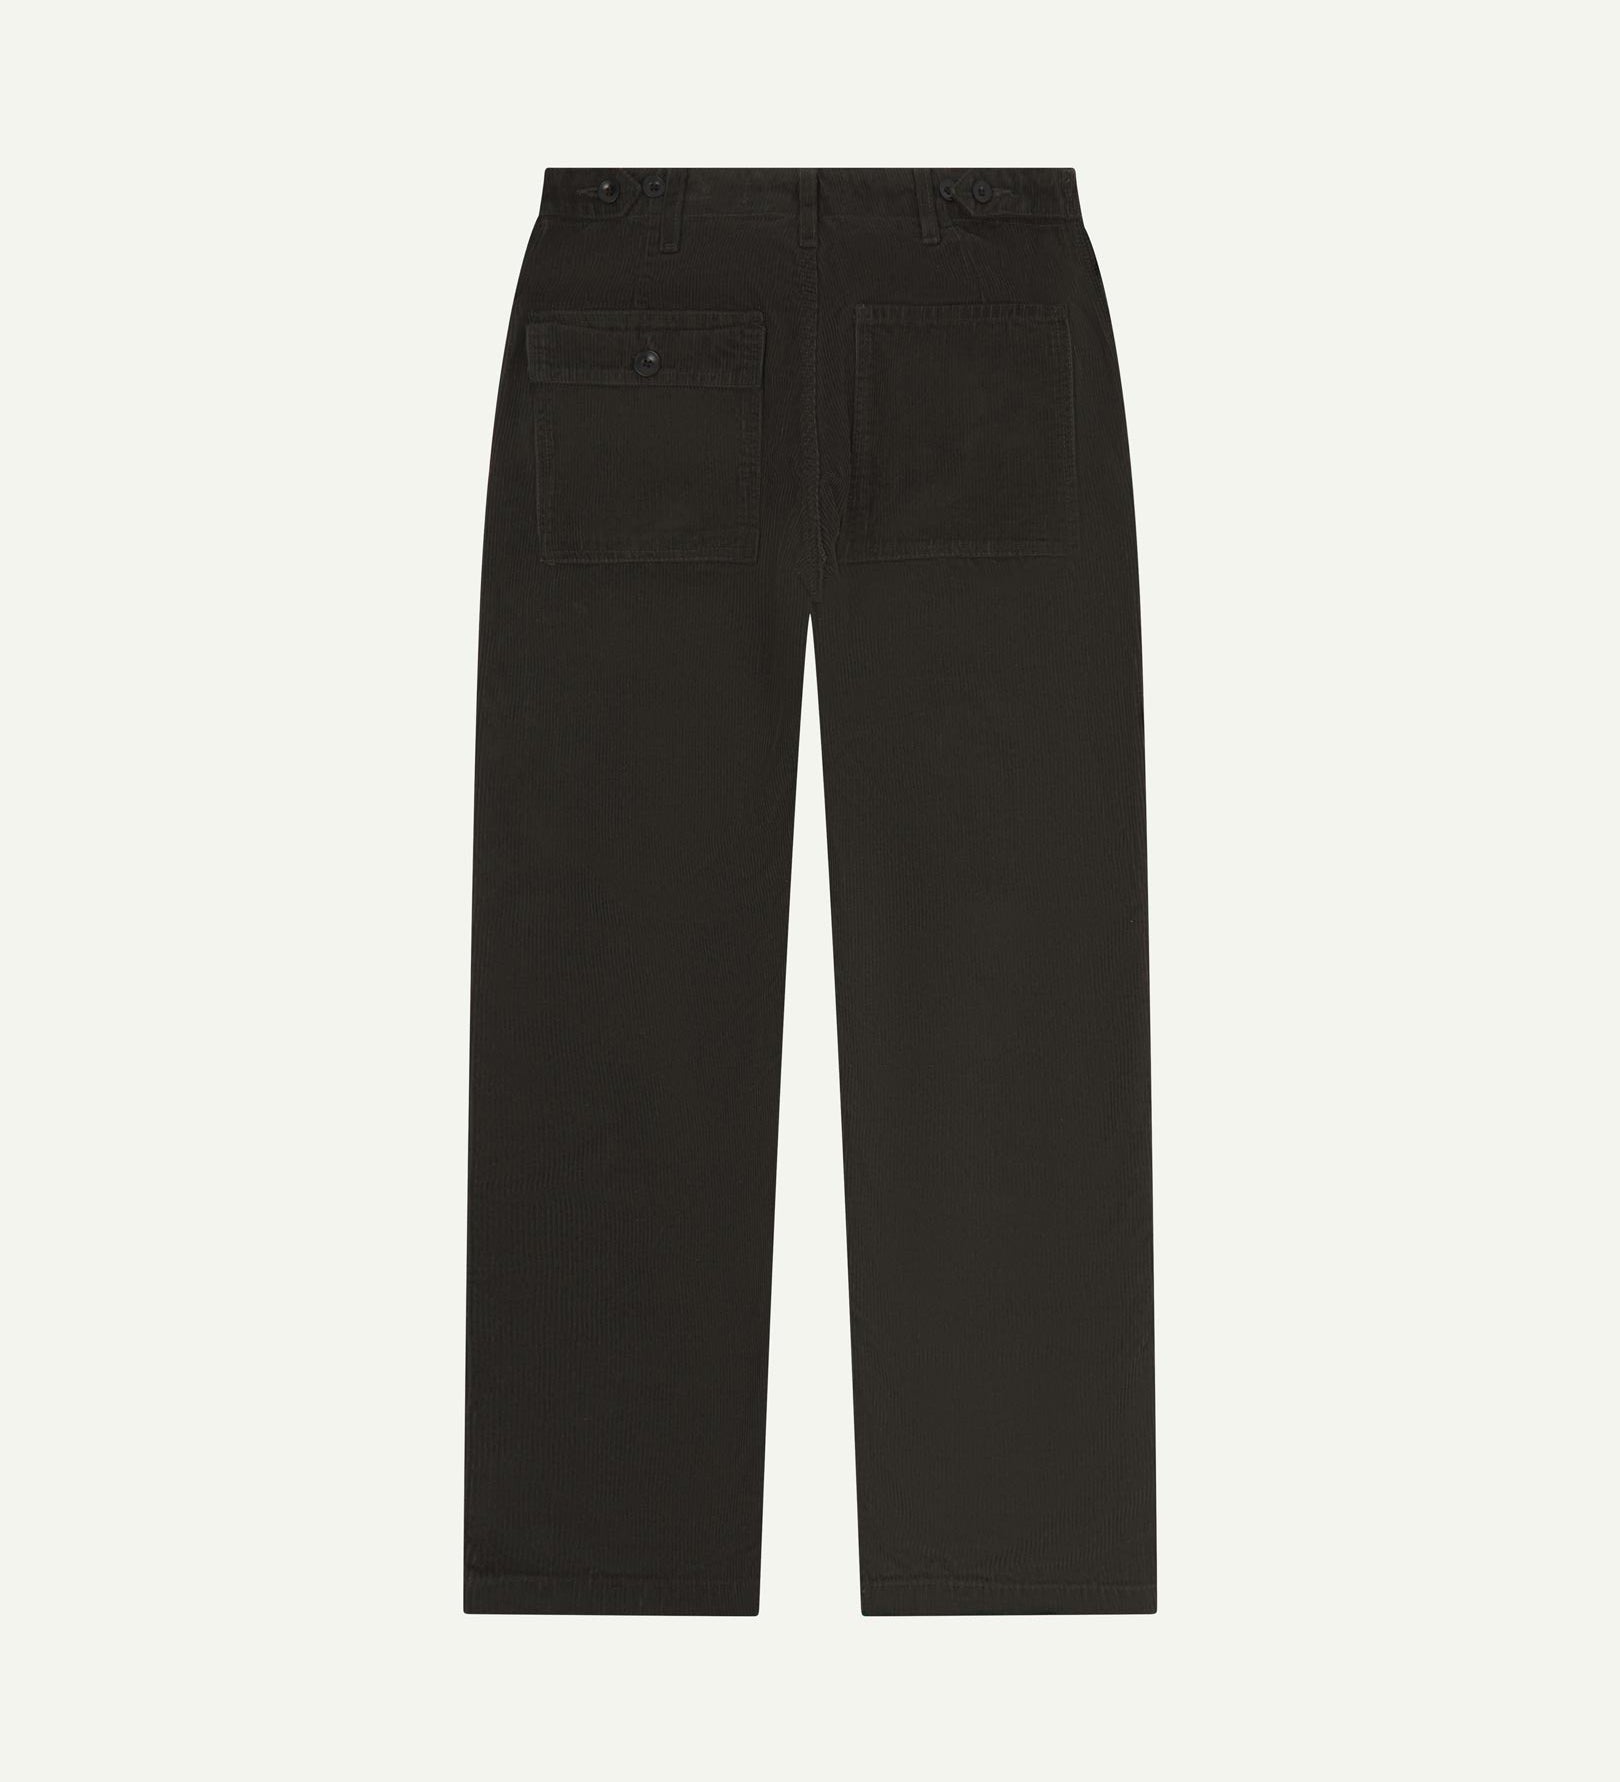 Full length back-view of faded black corduroy 5005 trousers with view of rear pockets, belt loops and tapered leg fit.